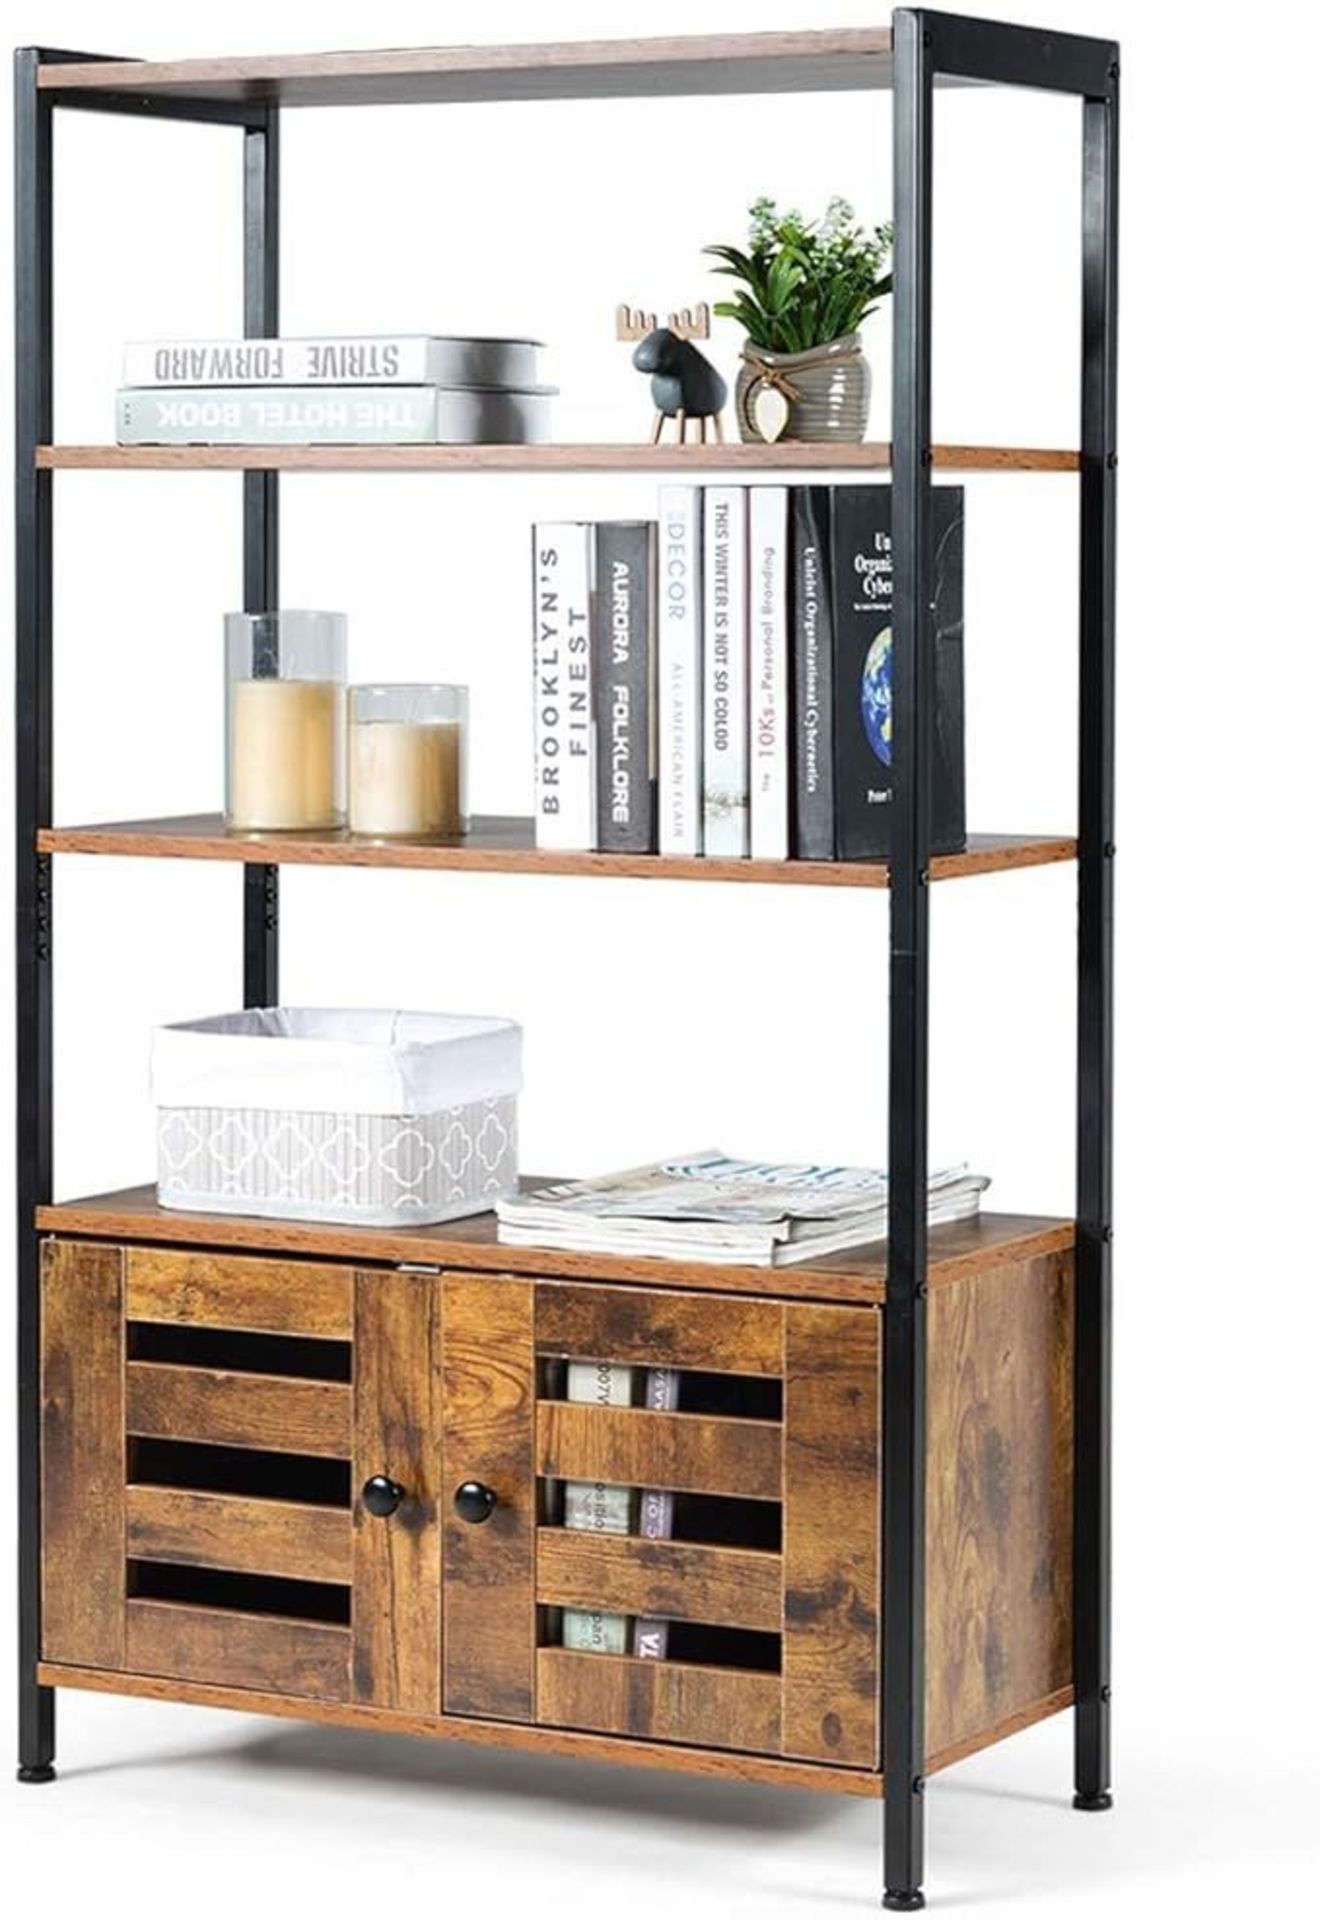 Industrial Bookshelf, Freestanding Storage Bookcase Cabinet with 4 Shelves and 2 Louvred Doors, - Image 2 of 2